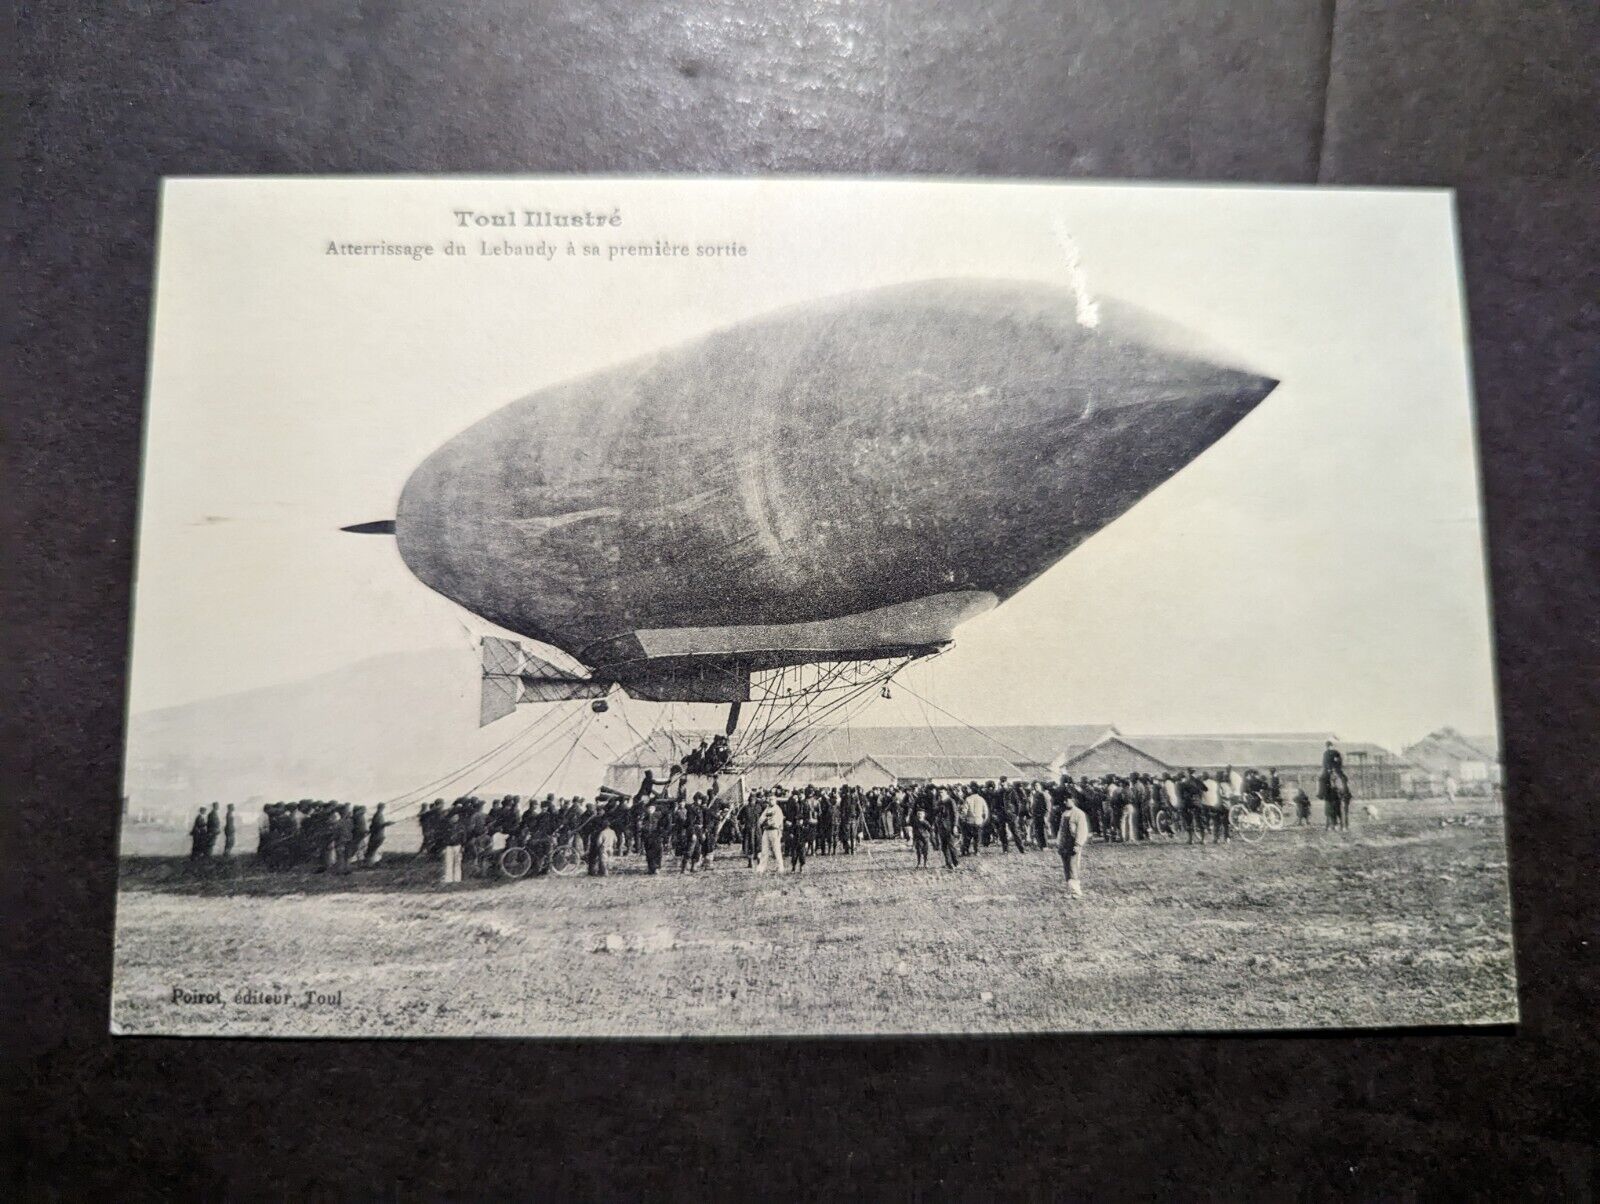 Mint France Postcard Dirigible Airship Lebaudy Zeppelin French Aviation in Toul